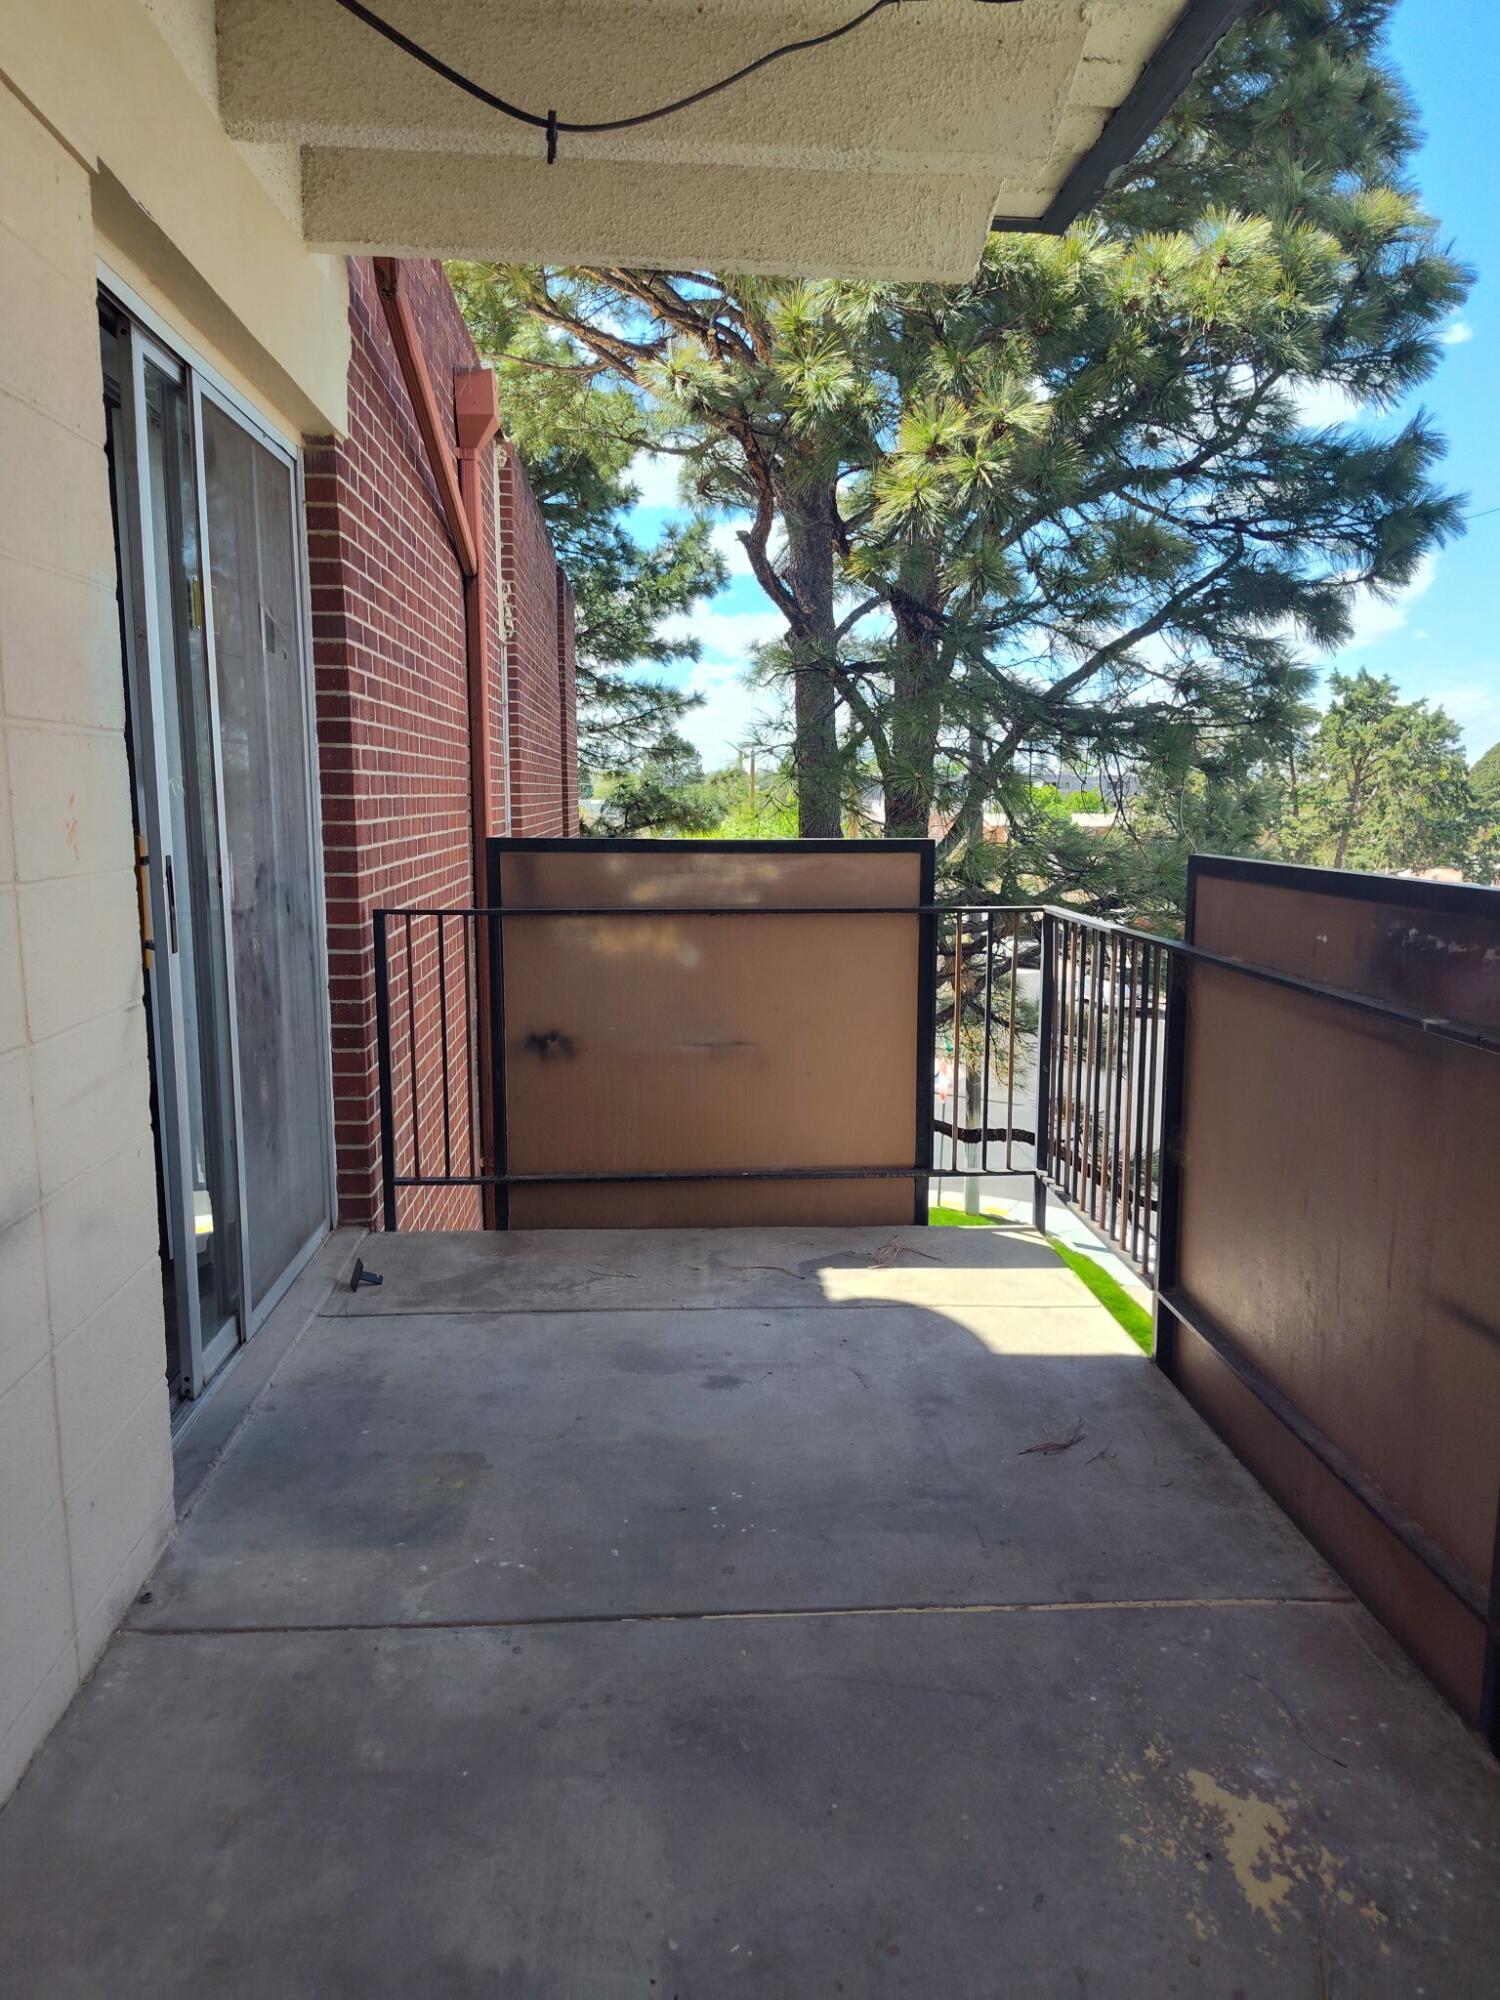 1 bed, 1 bath condo, plank flooring throughout,  balcony, close to hospitals and shopping! Very affordable!